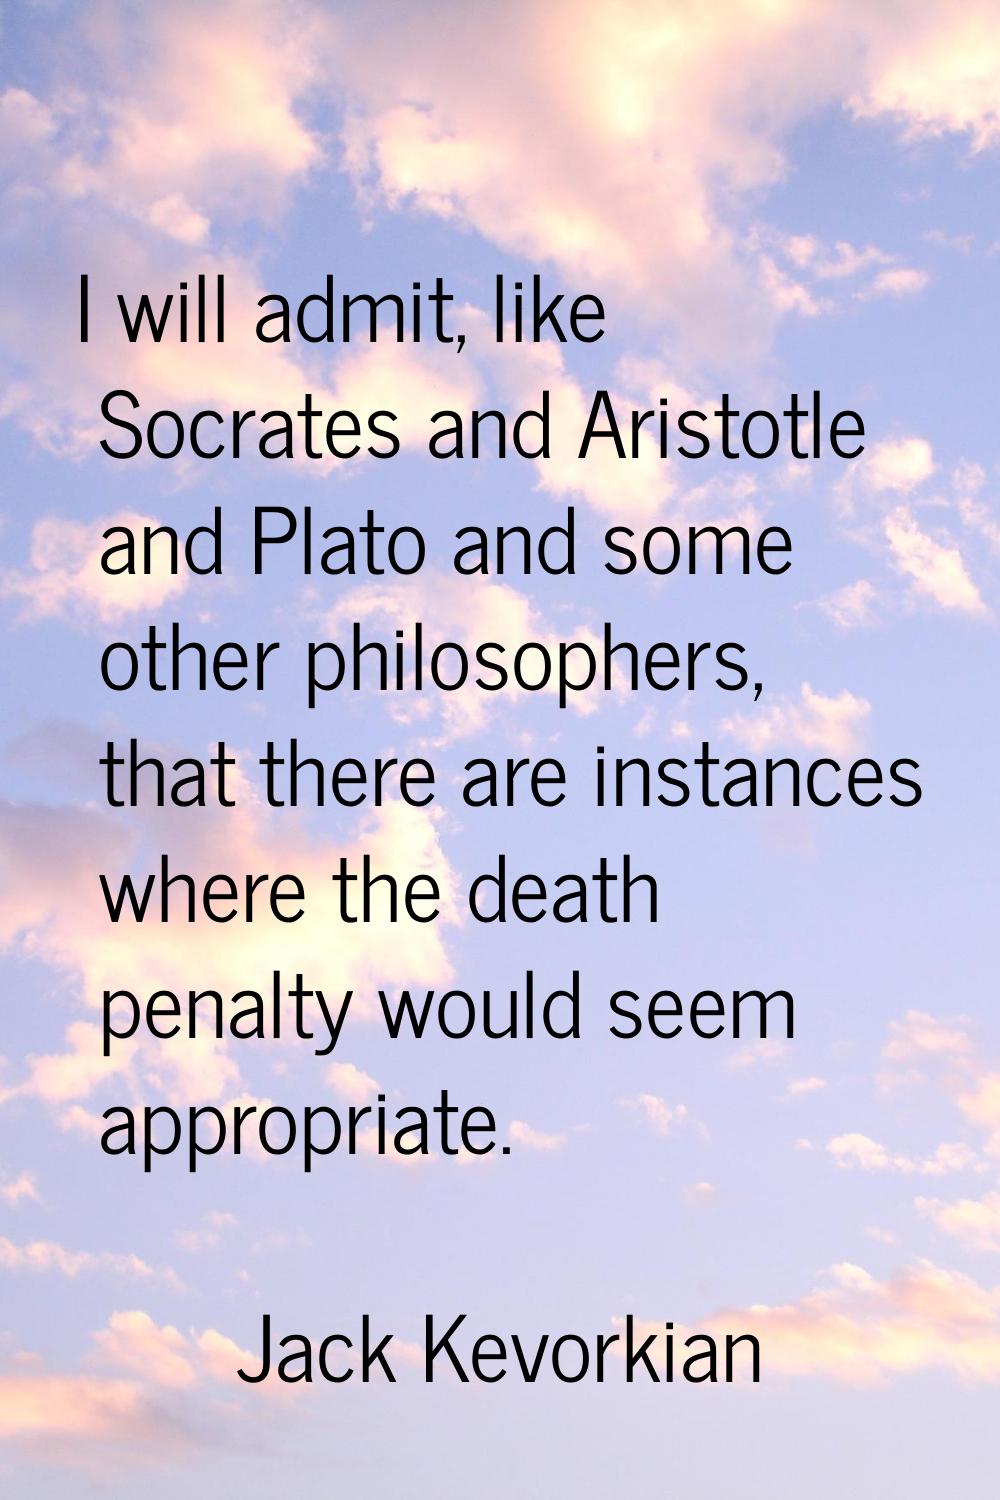 I will admit, like Socrates and Aristotle and Plato and some other philosophers, that there are ins